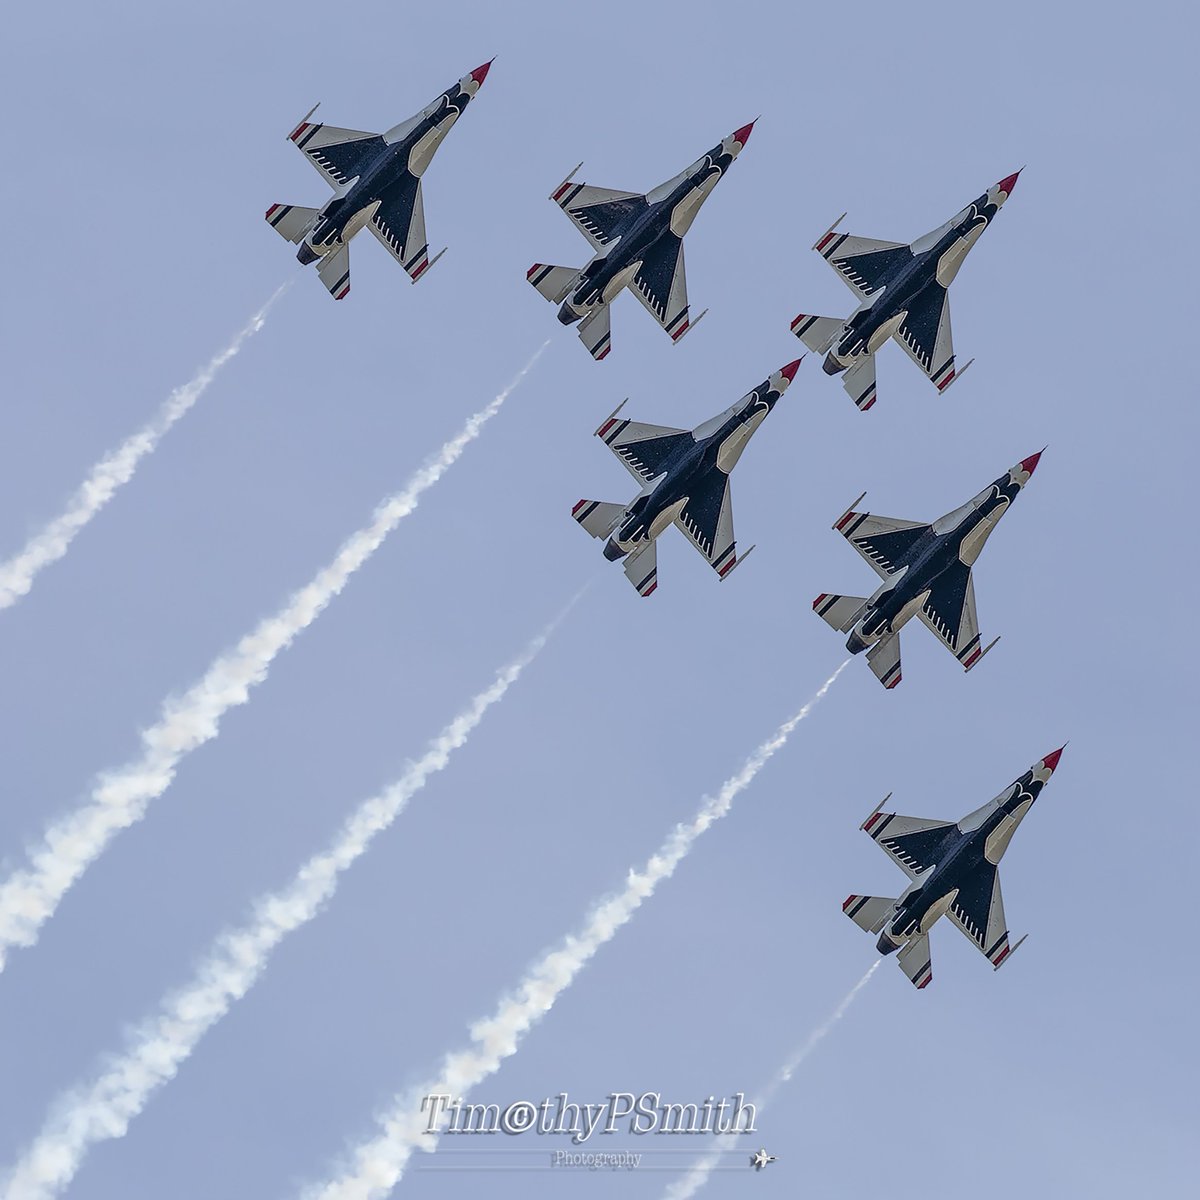 DELTA ROLL 
#USAF #Thunderbirds The Delta Roll fills the sky with red white and blue #ThunderOverTheSound hosted by #keeslerafb #Biloxi #Mississippi 
#F16 #Vipers 
#Merica
🇺🇸
#AvGeek #Militaryaviation ￼
#Airshow #Aviation